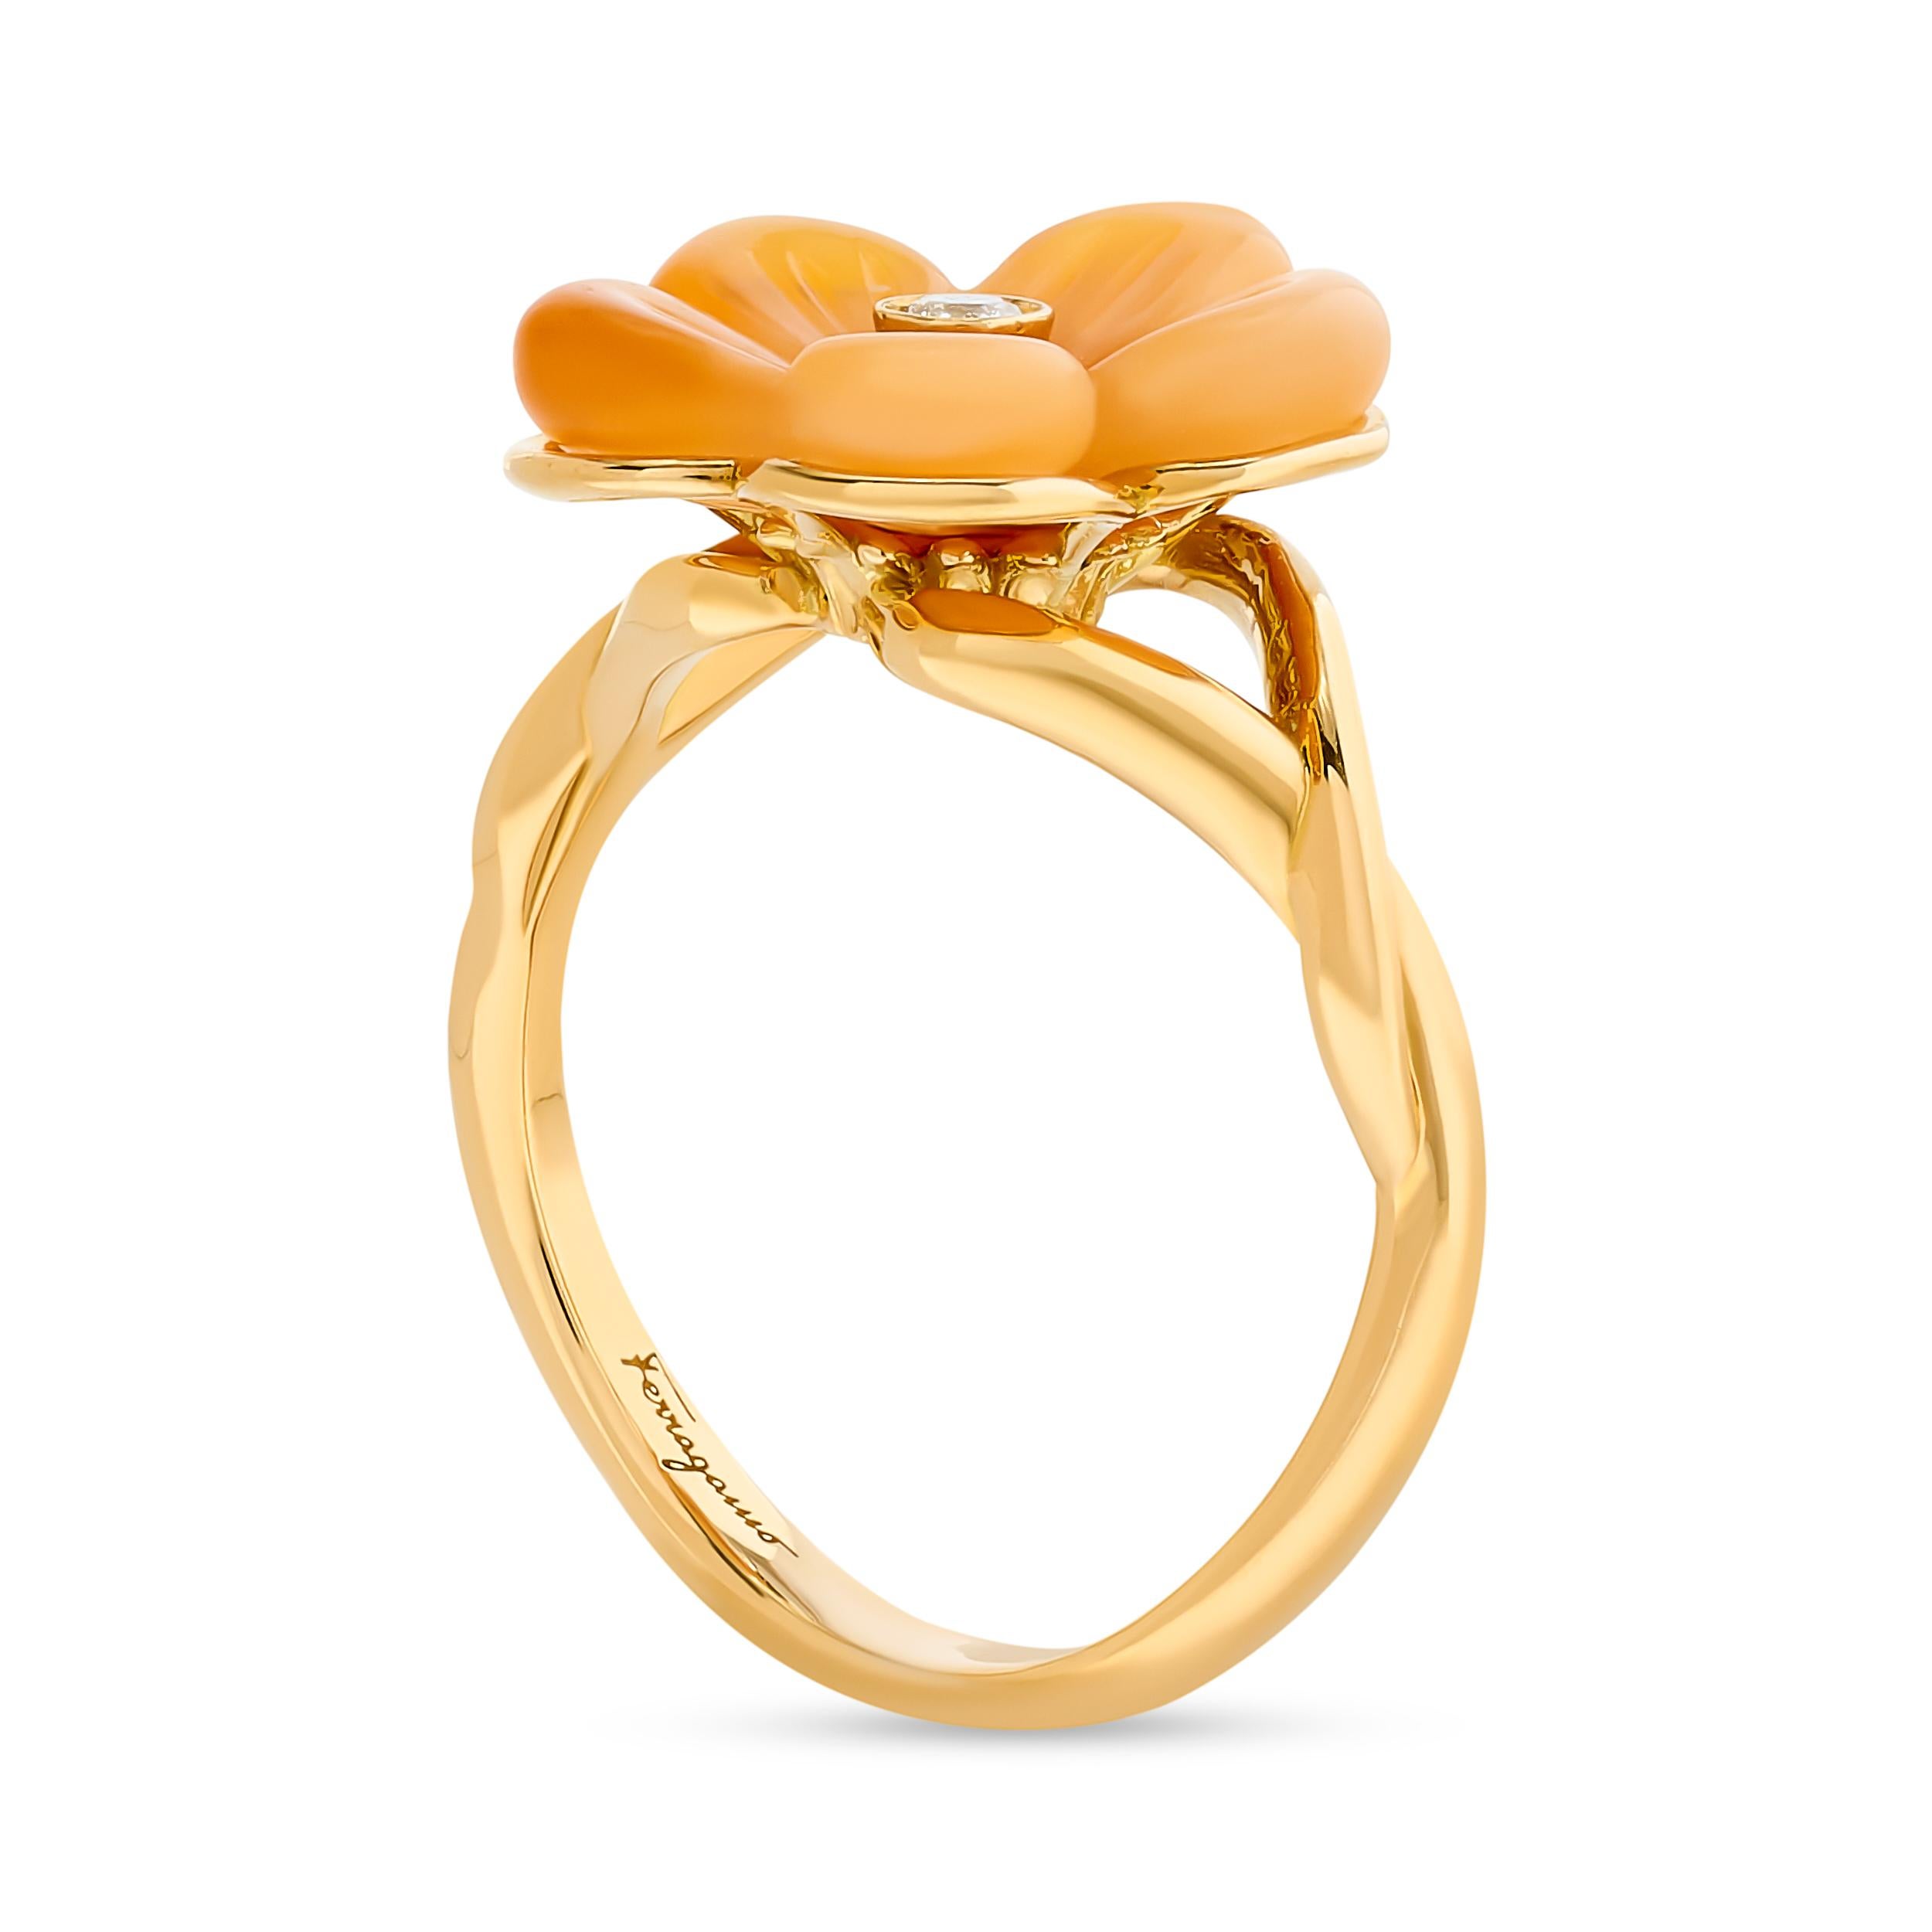 This exquisite 18 karat Ferragamo ring features a captivating floral design with carved, delicate fire opal petals that gently curve around a diamond center. *Please note, due to the nature of the opal, most of the flower is a solid, milky color